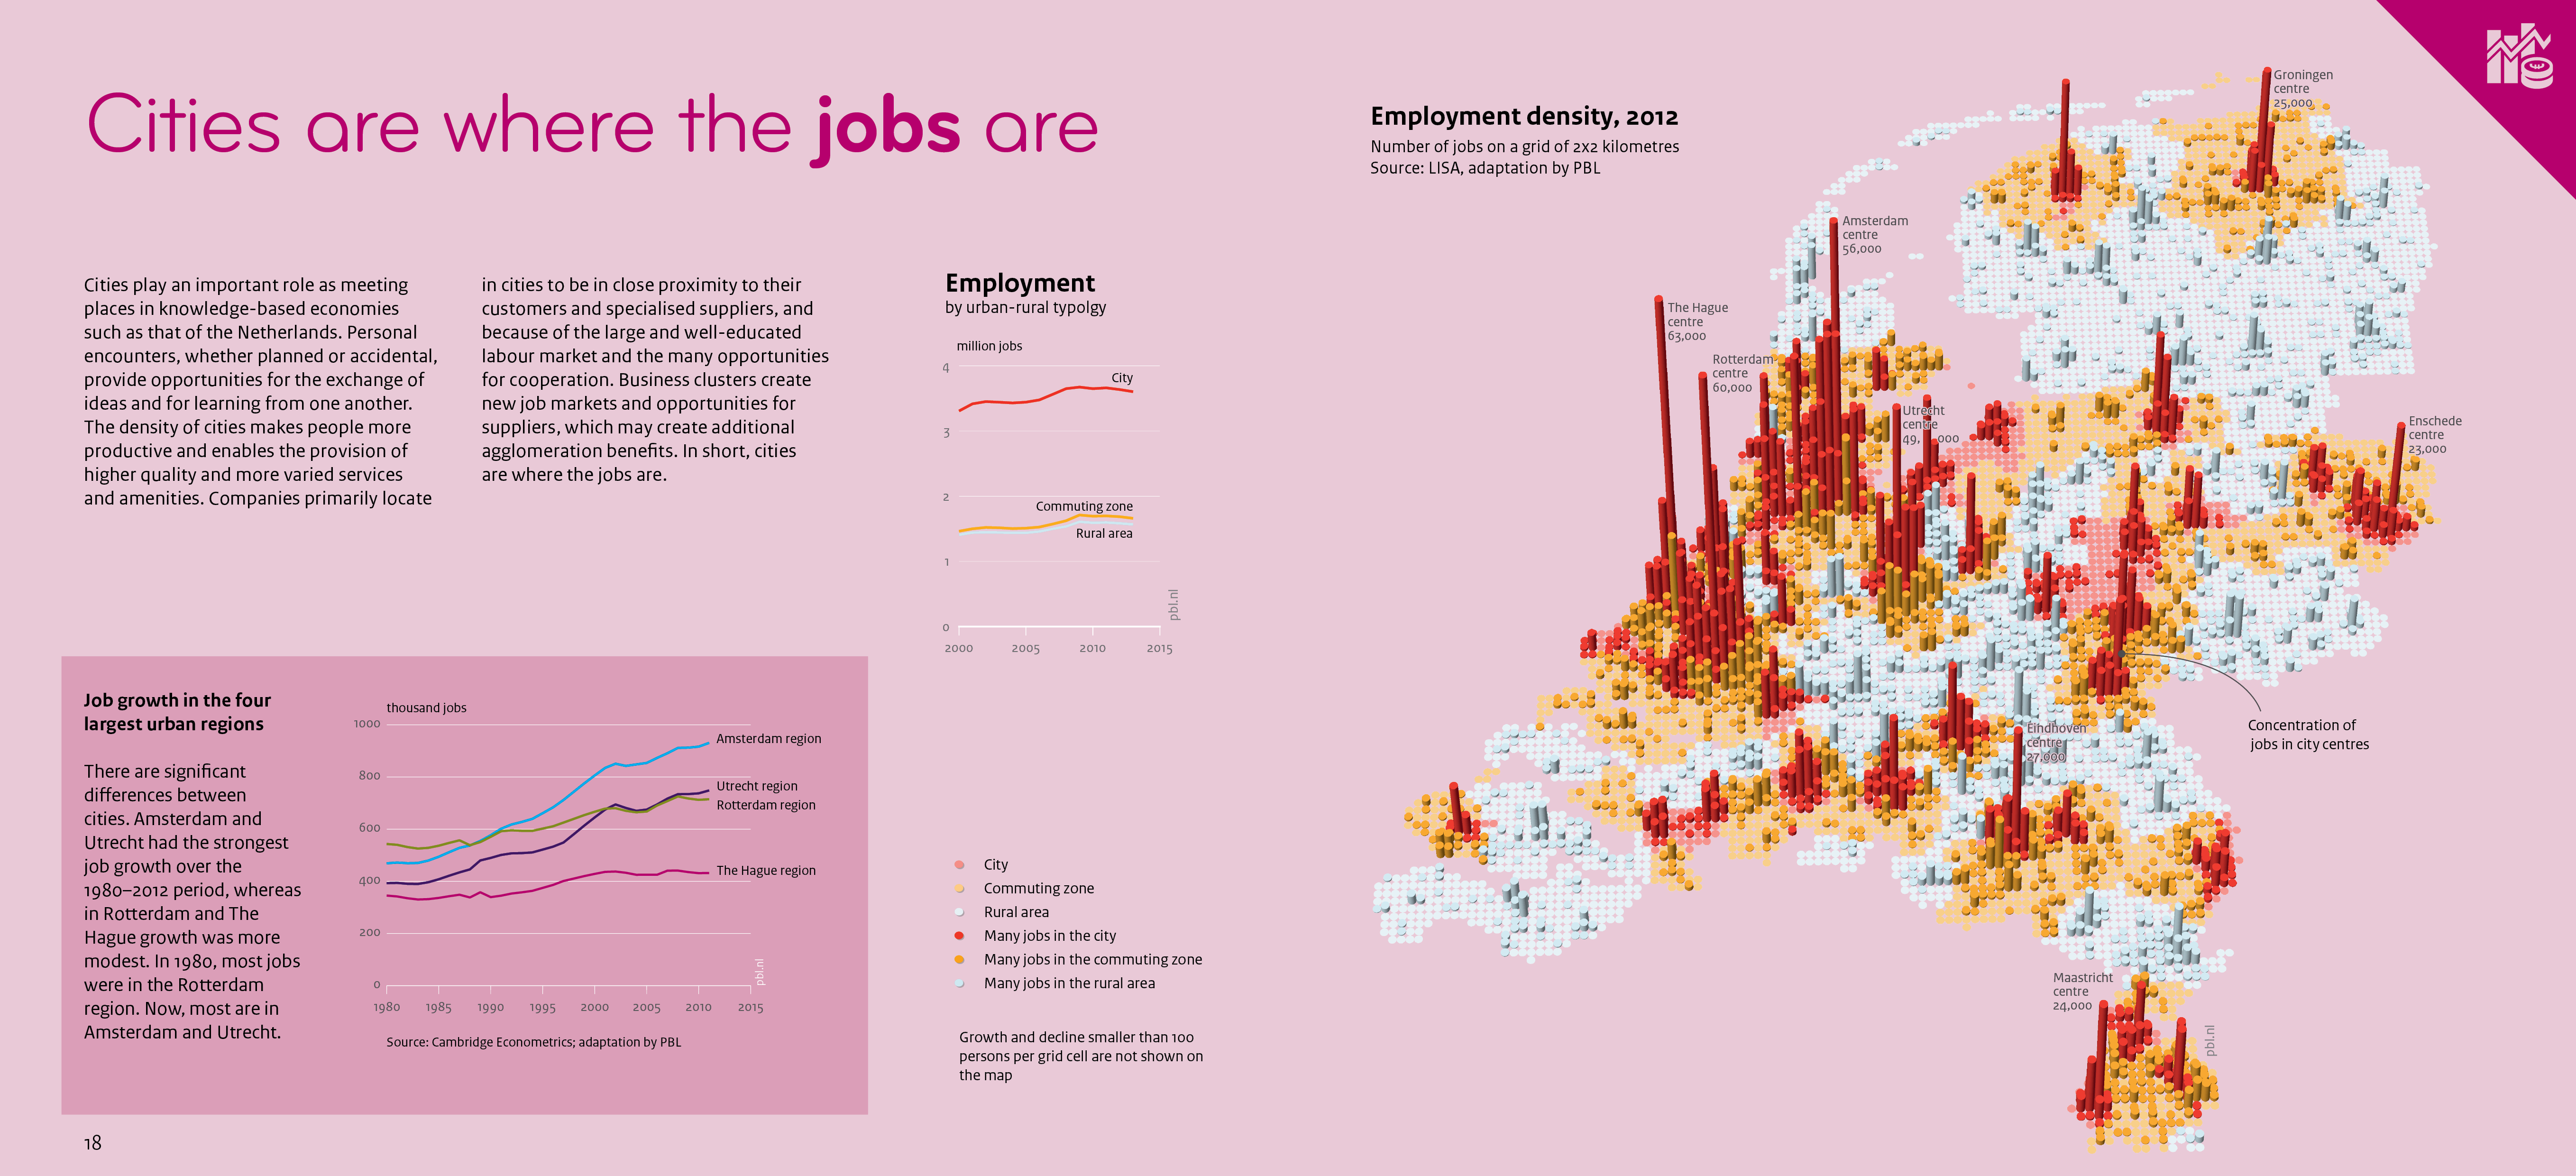 This infographic shows the number of jobs in the year 2012 on a grid of 2x2 kilometres.